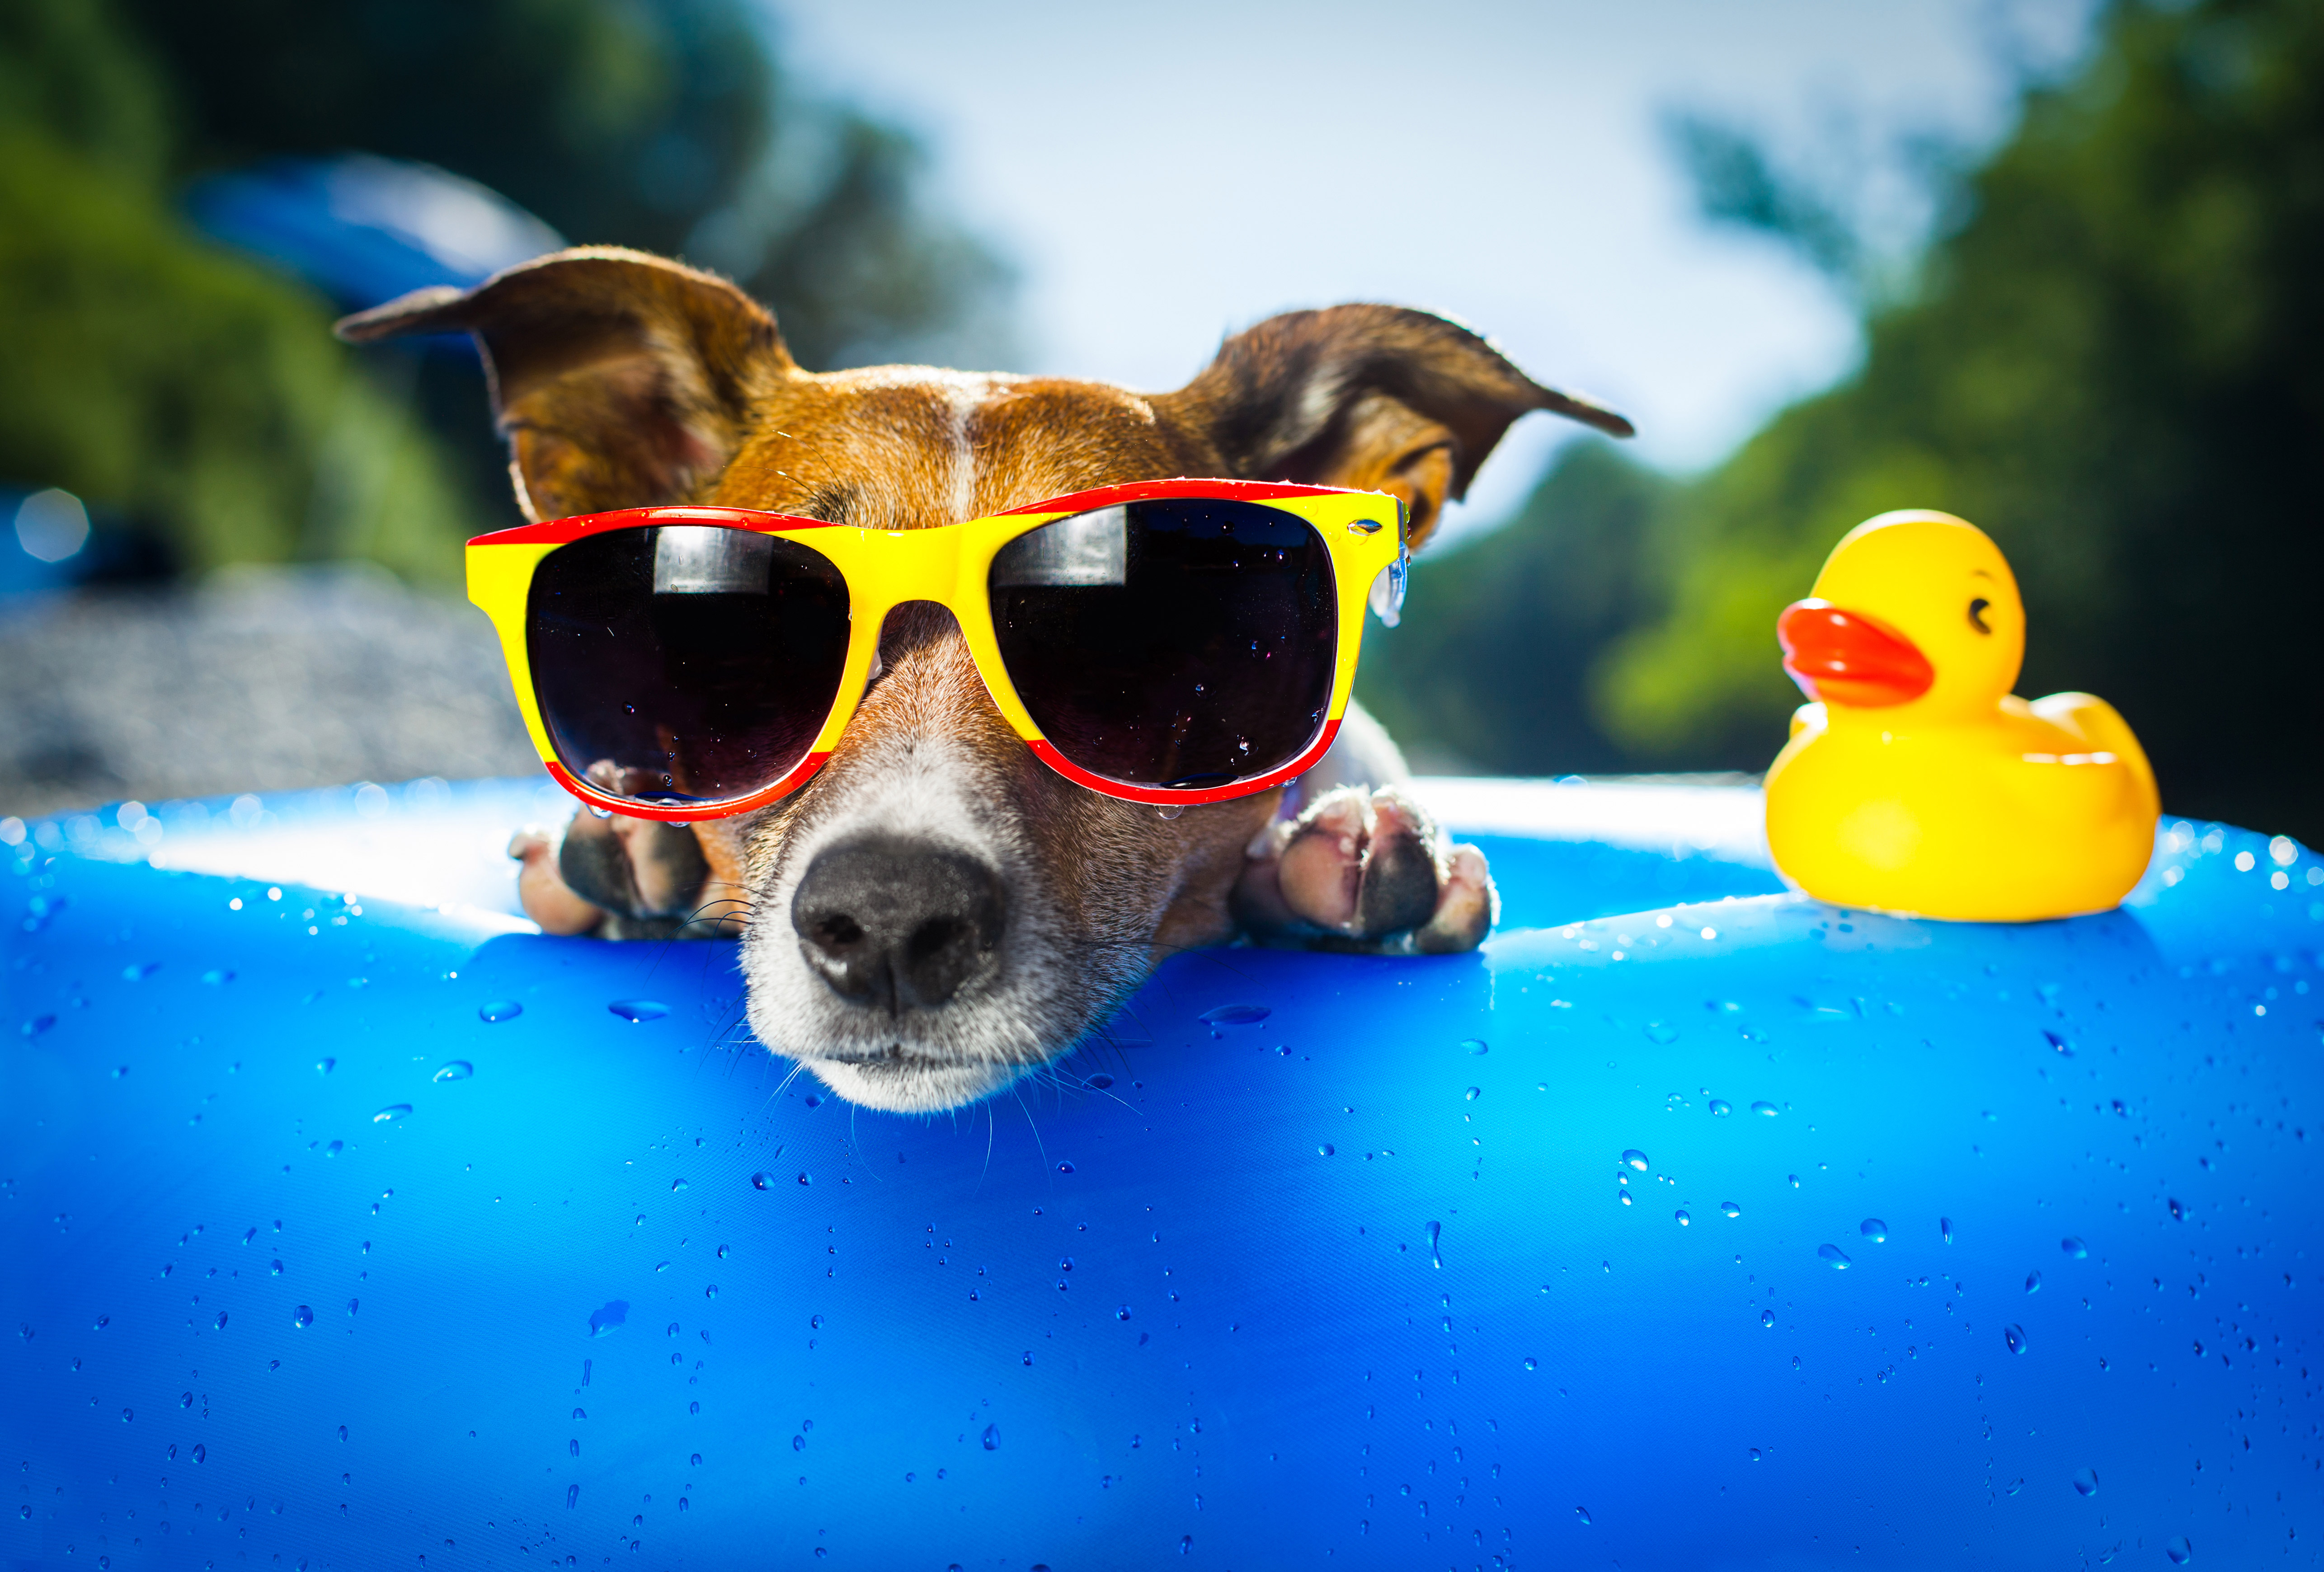 Dog Wearing Sunglasses, HD Animals, 4k Wallpapers, Images, Backgrounds